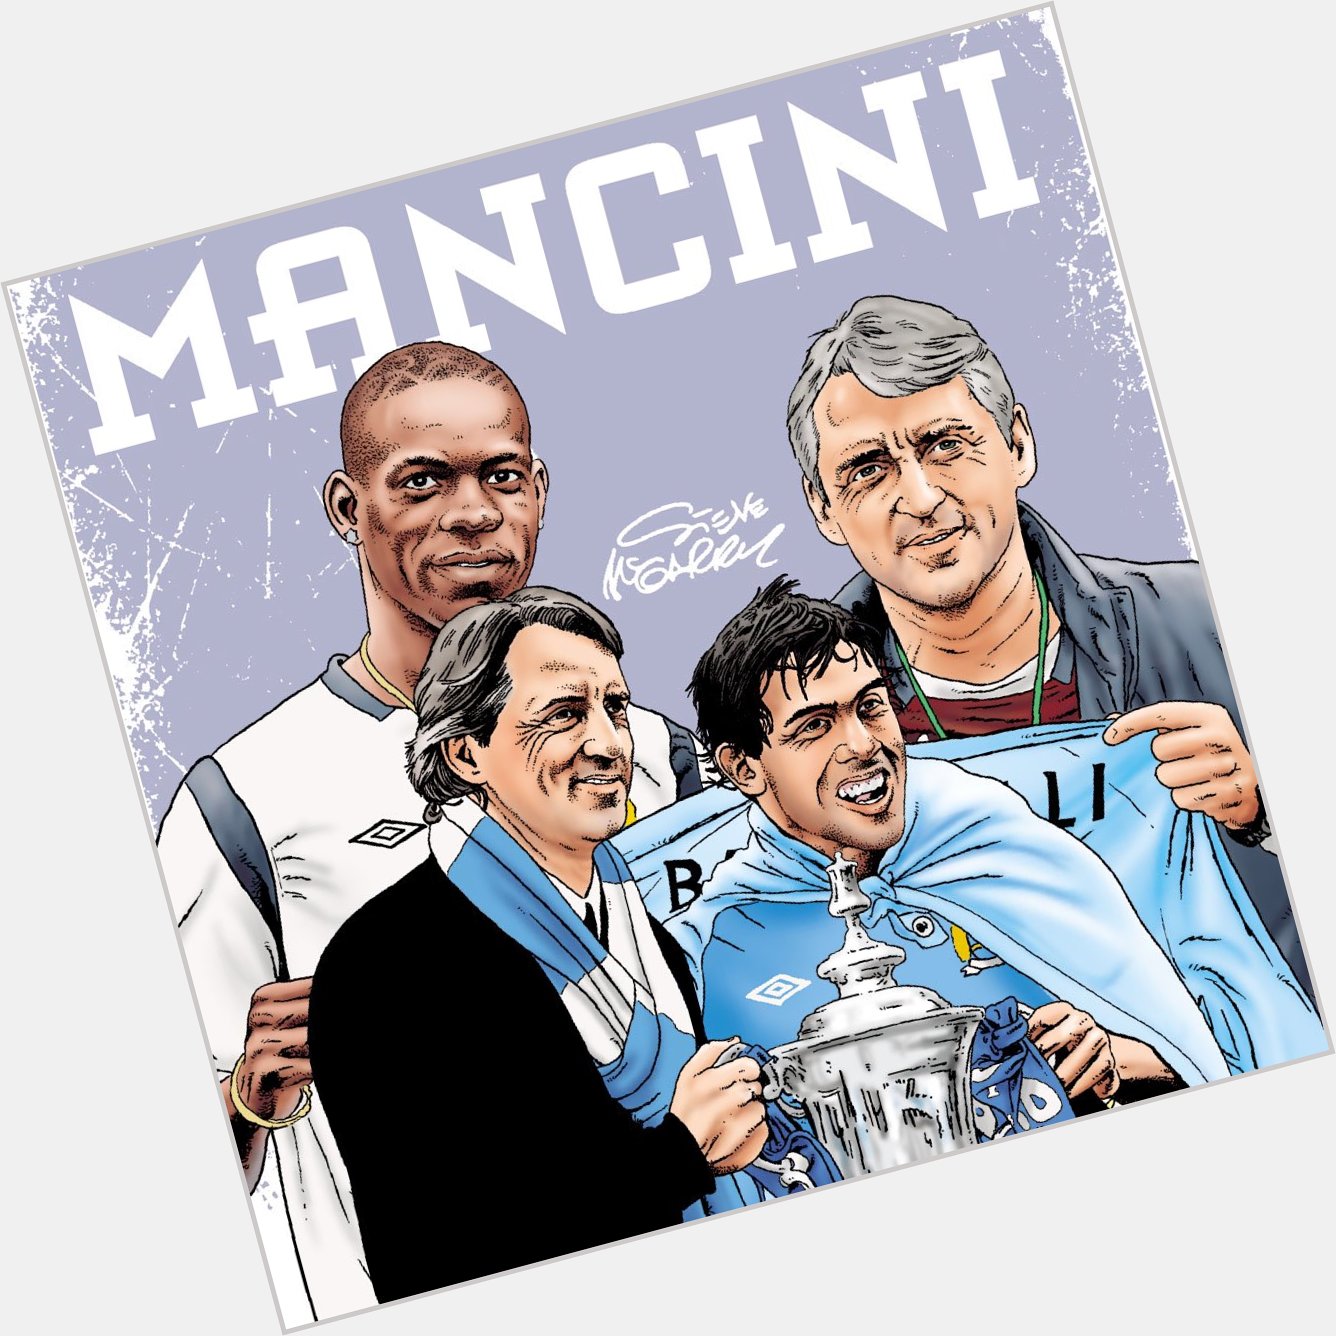 Happy birthday Roberto Mancini - thanks again for ending that 44 year wait for the title!  